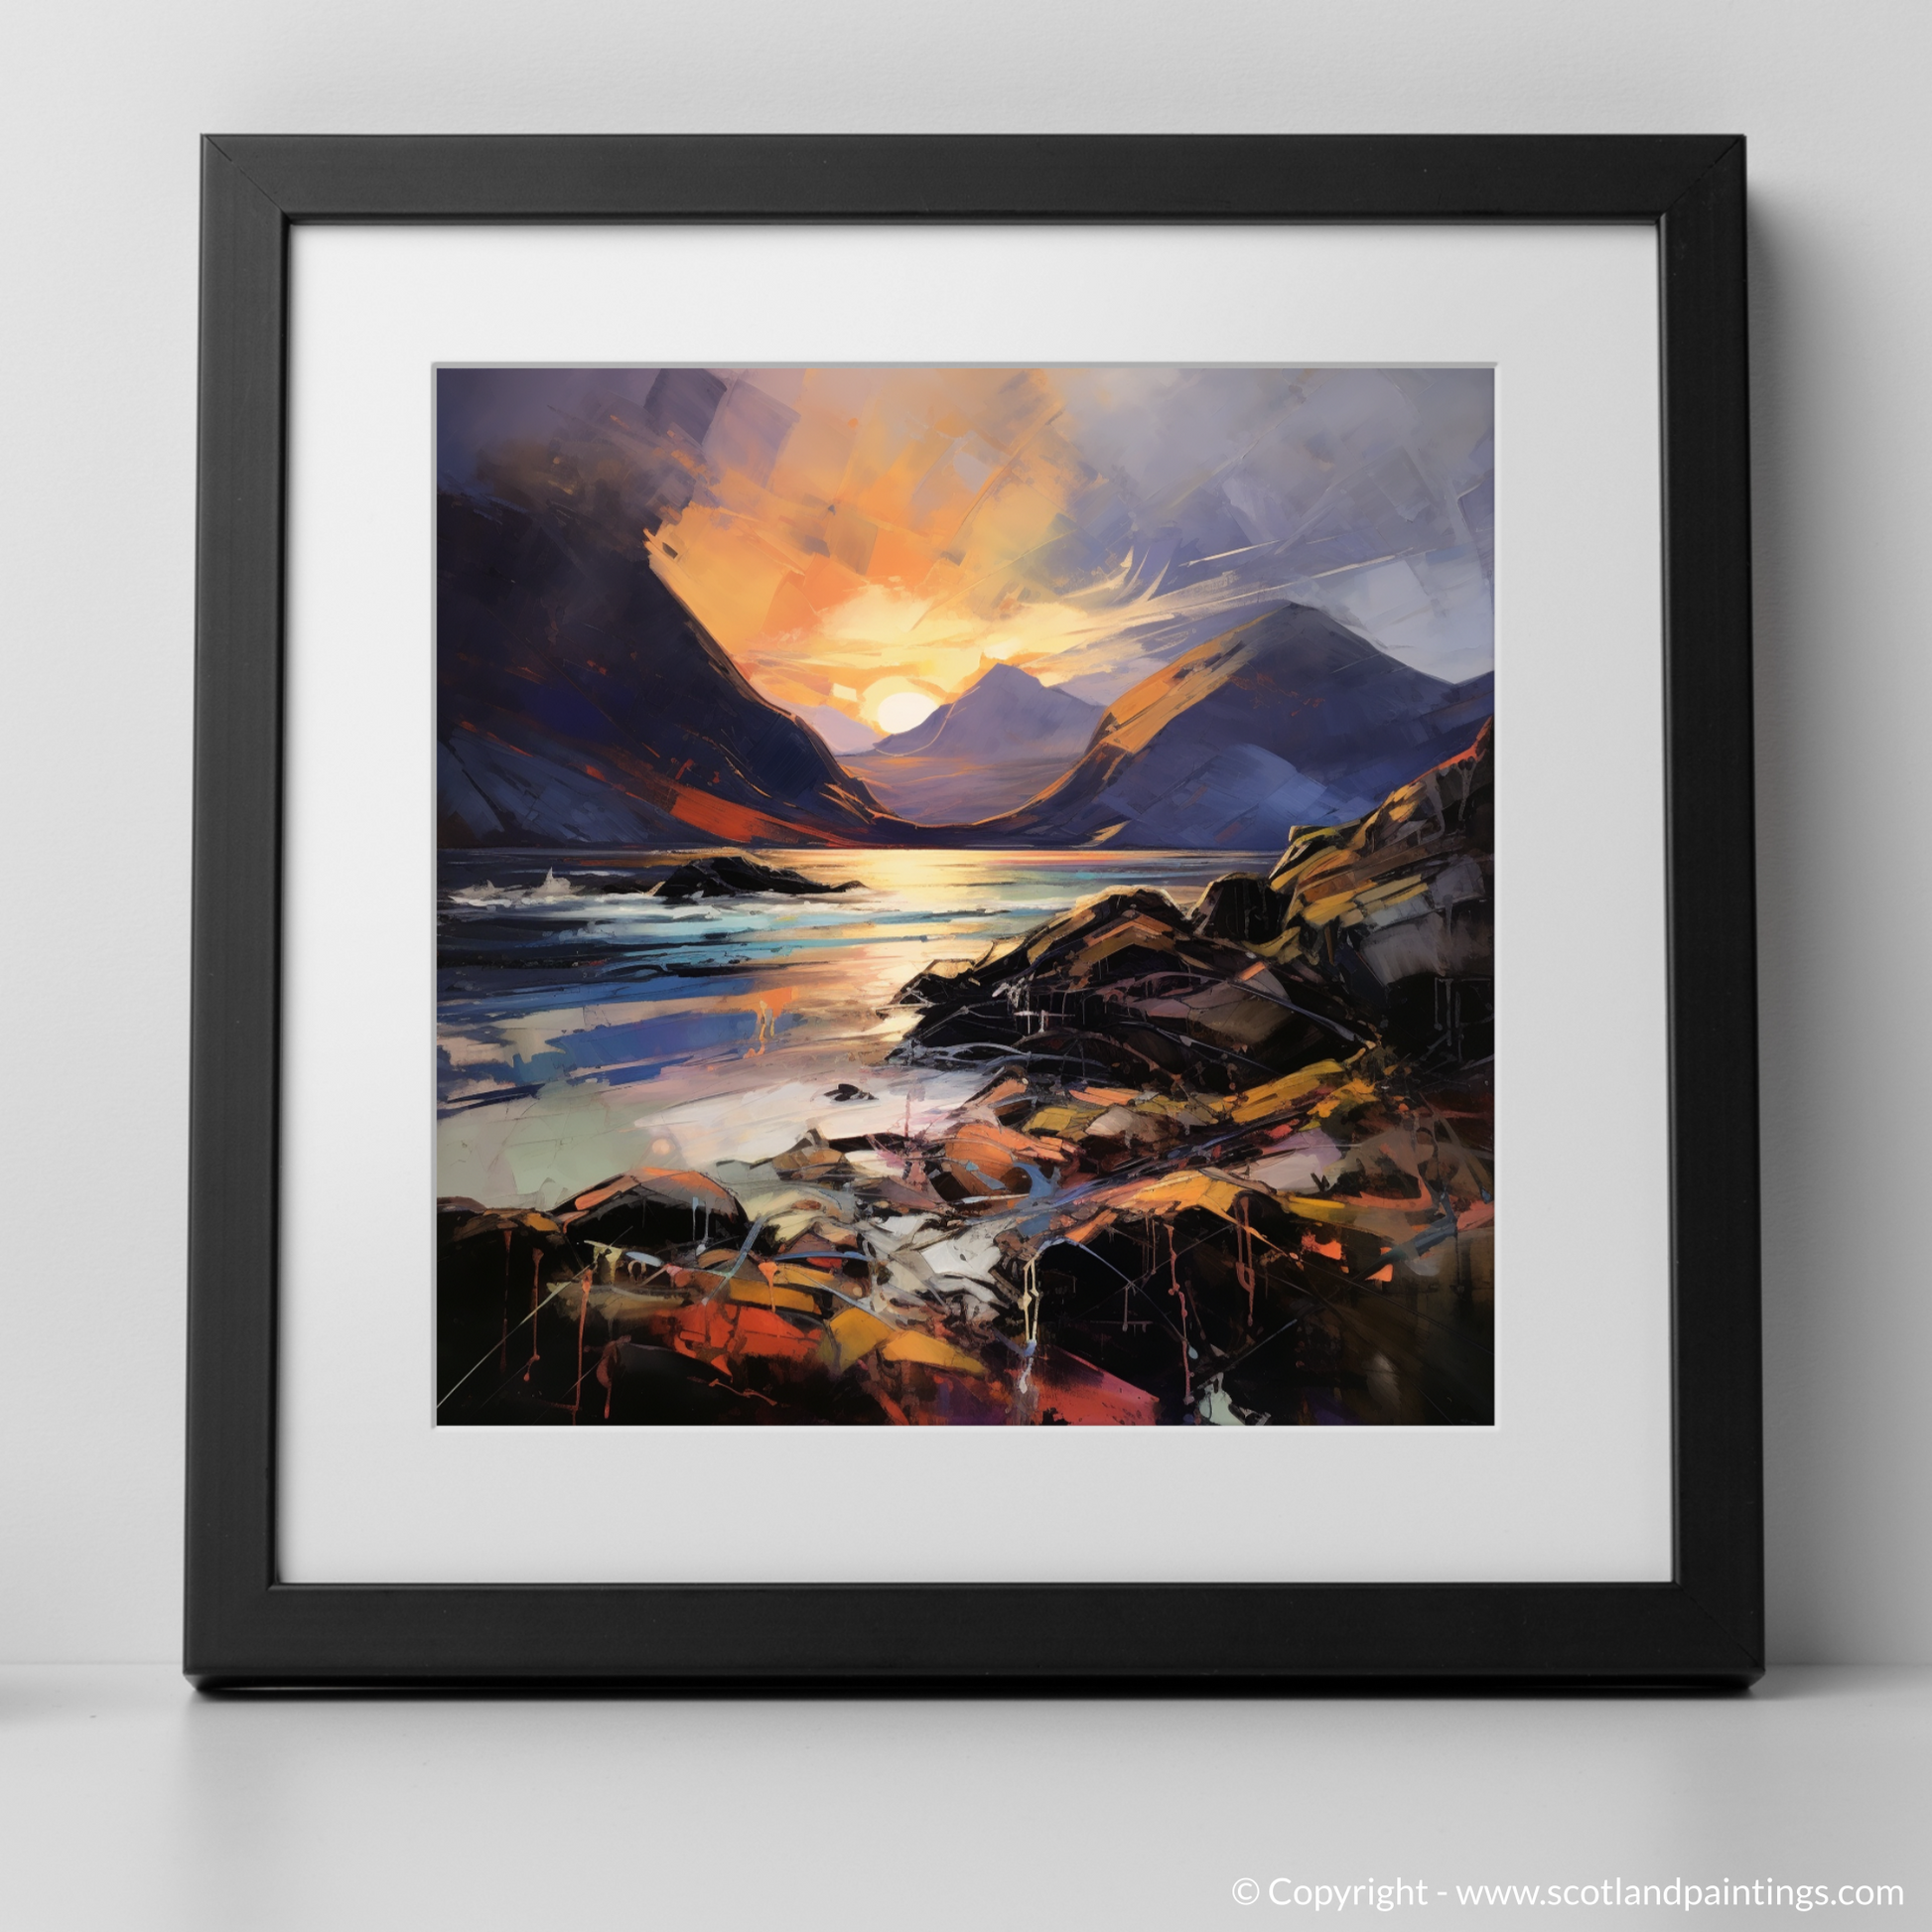 Art Print of Elgol Bay at sunset with a black frame